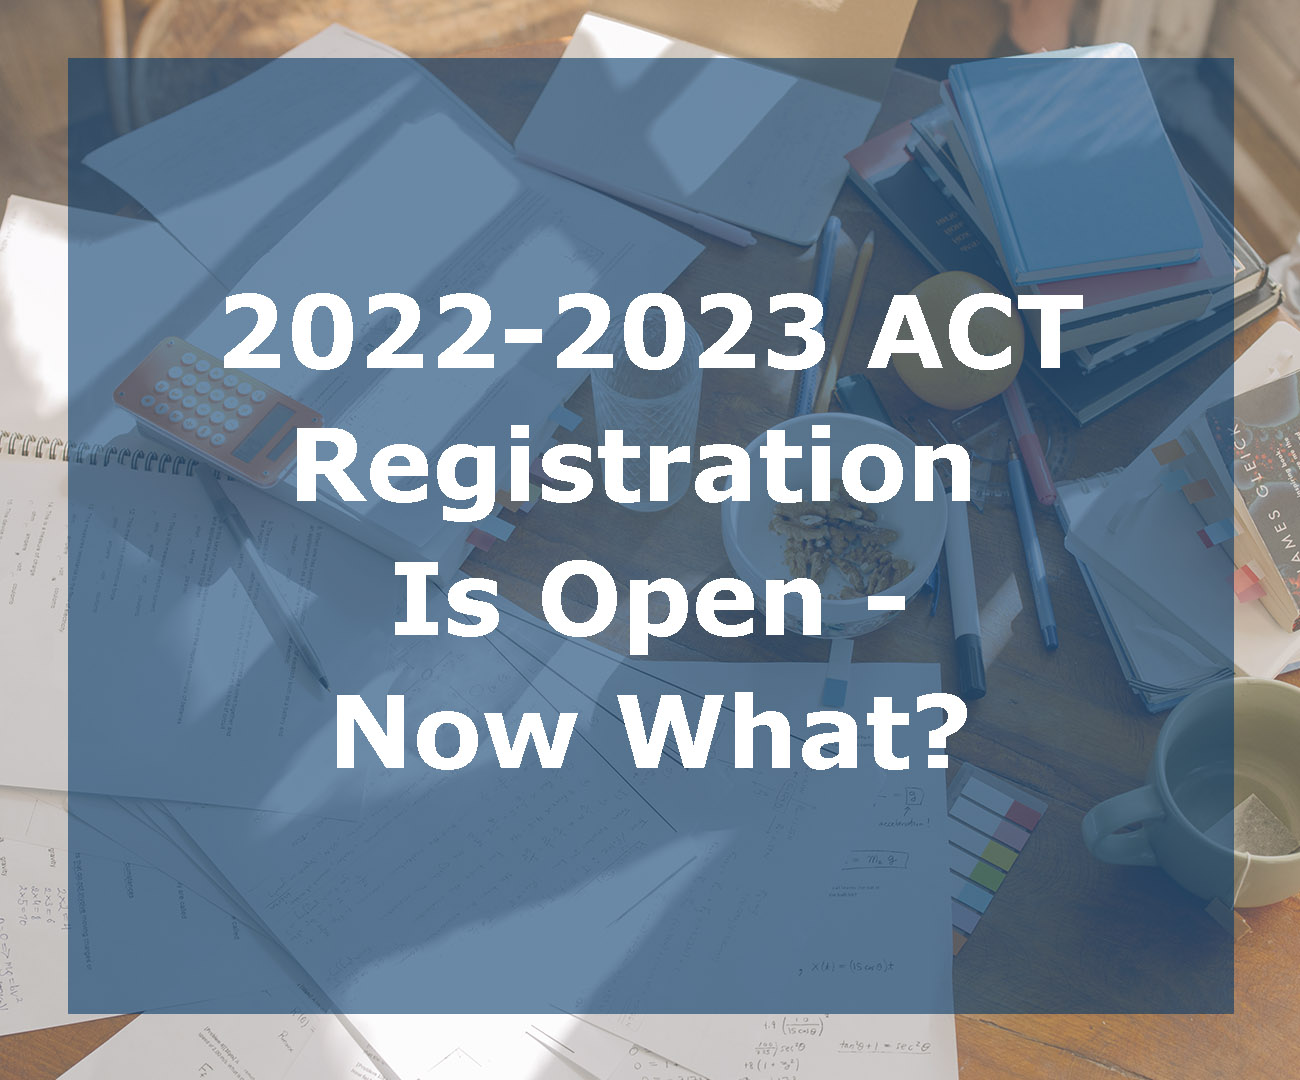 The 2022-2023 ACT Registration is now open! What now? - Insight Education